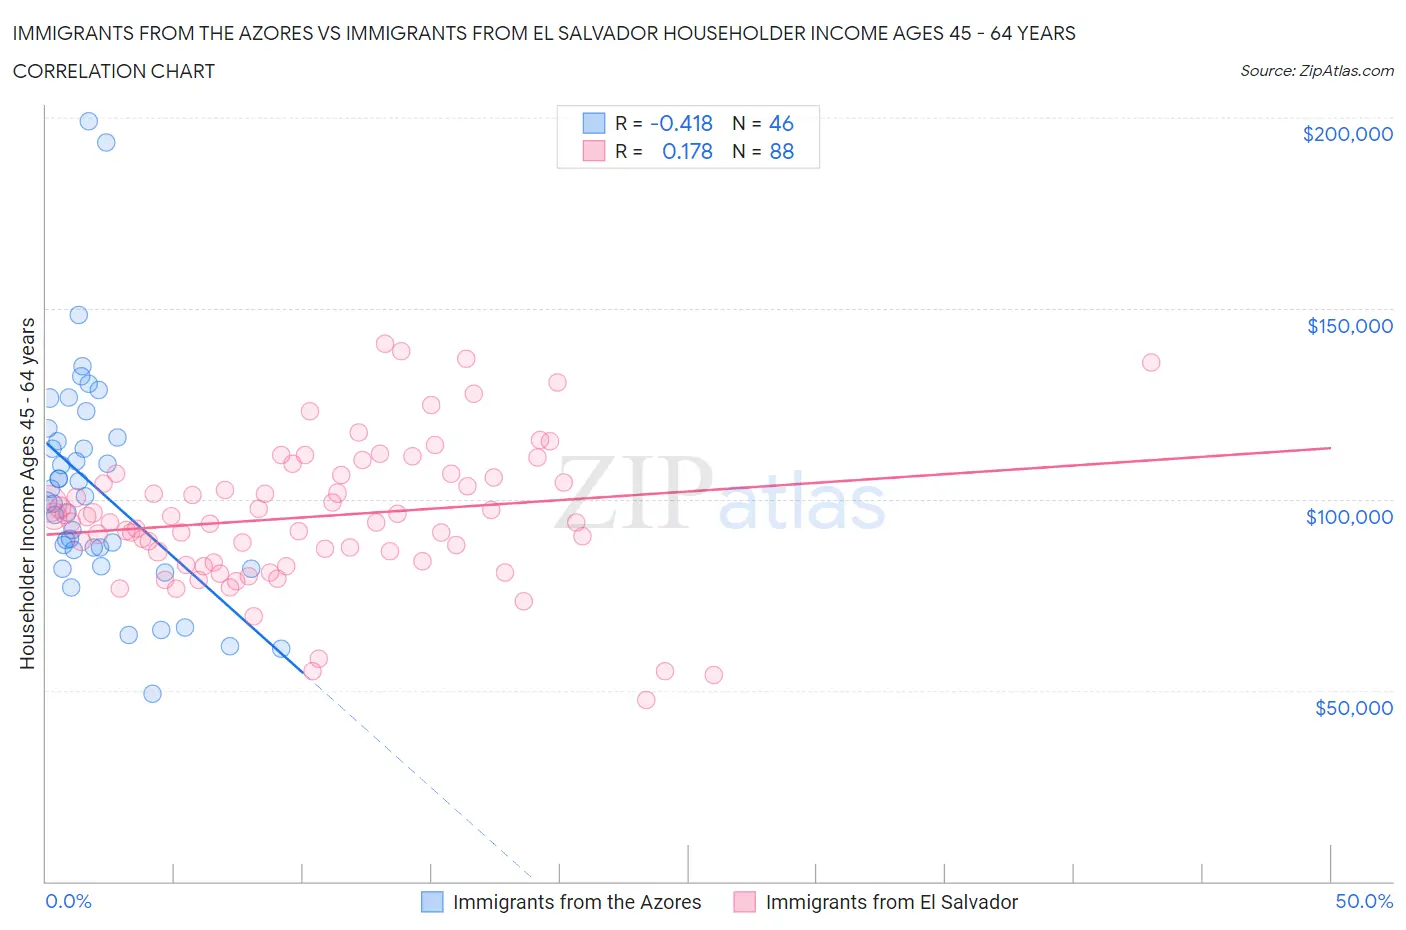 Immigrants from the Azores vs Immigrants from El Salvador Householder Income Ages 45 - 64 years